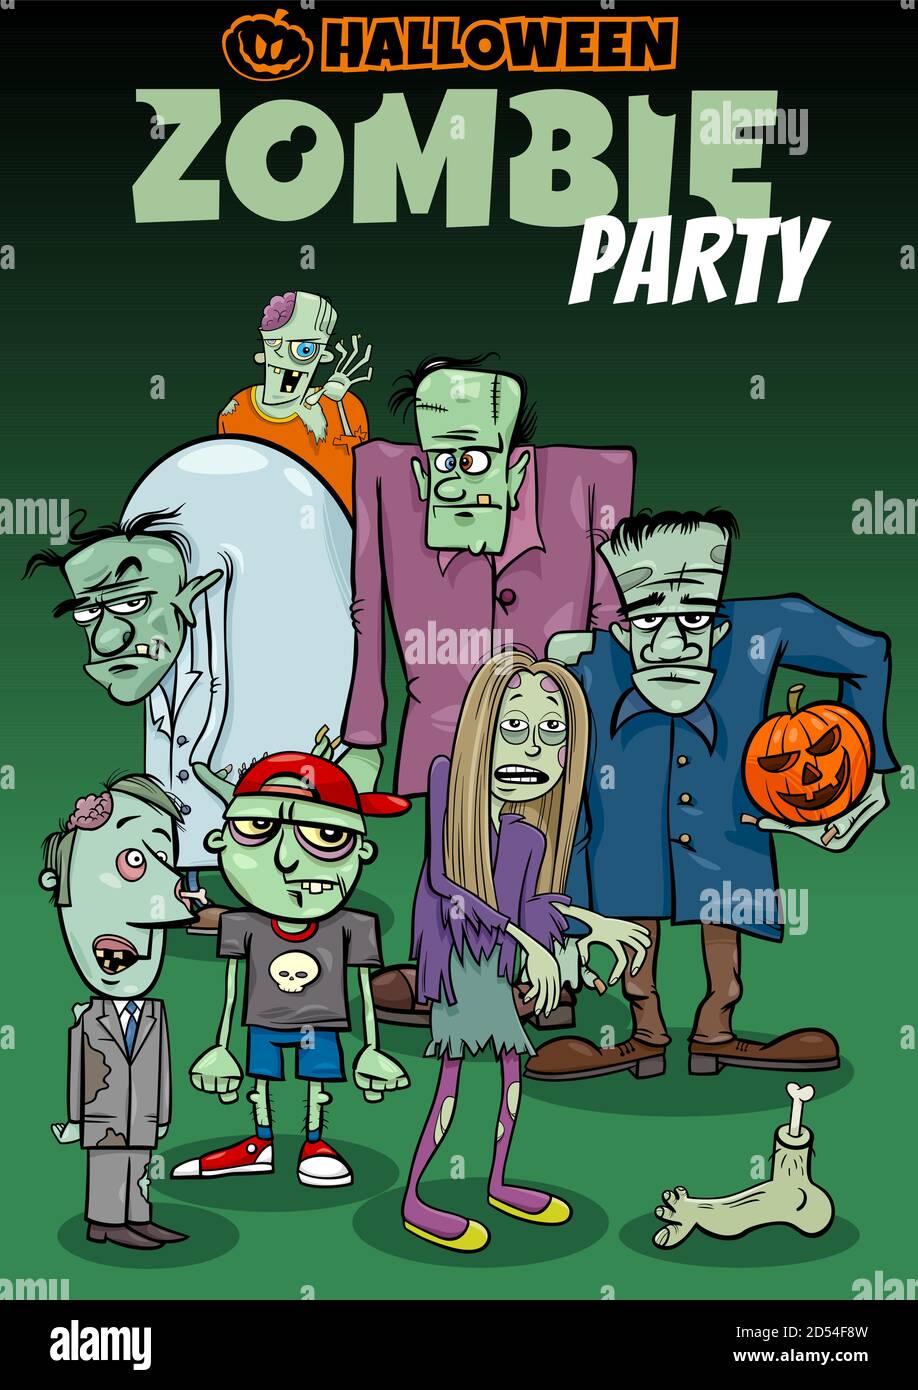 Cartoon Illustration of Halloween Holiday Zombie Party Poster or Invitation Design Stock Vector